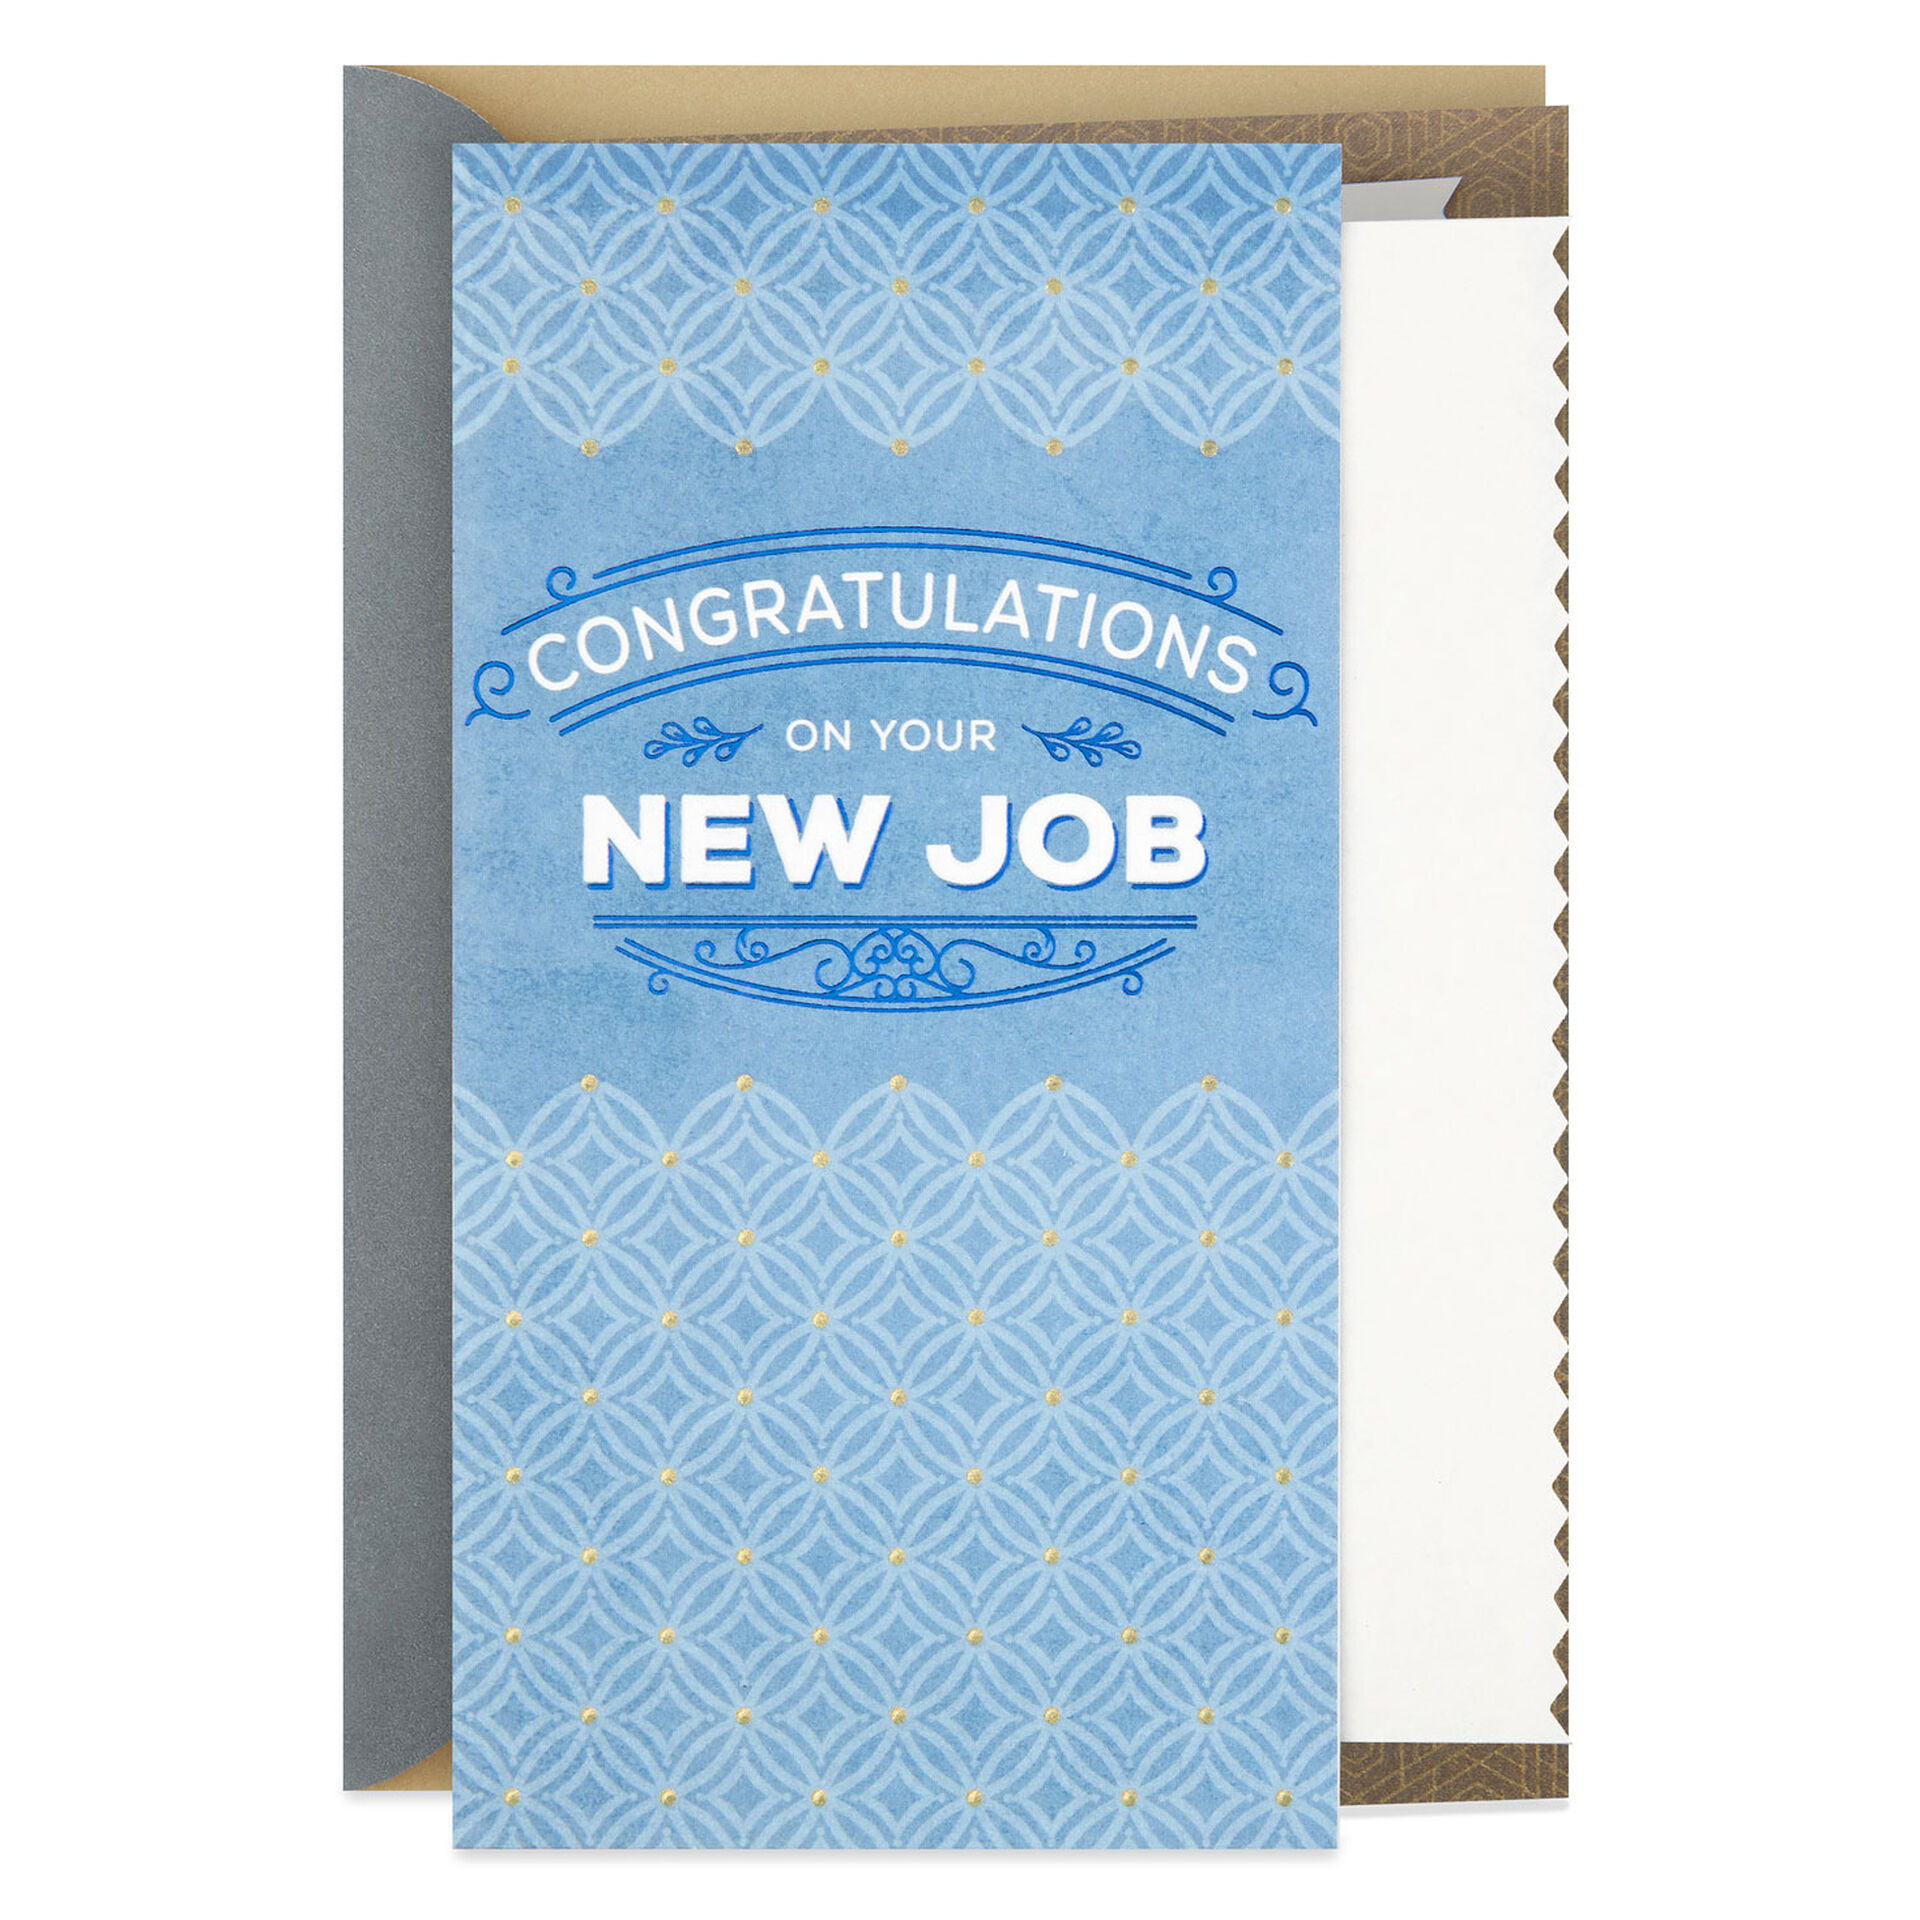 Blue-and-Gold-Ogee-New-Job-Congratulations-Card_429M2008_01